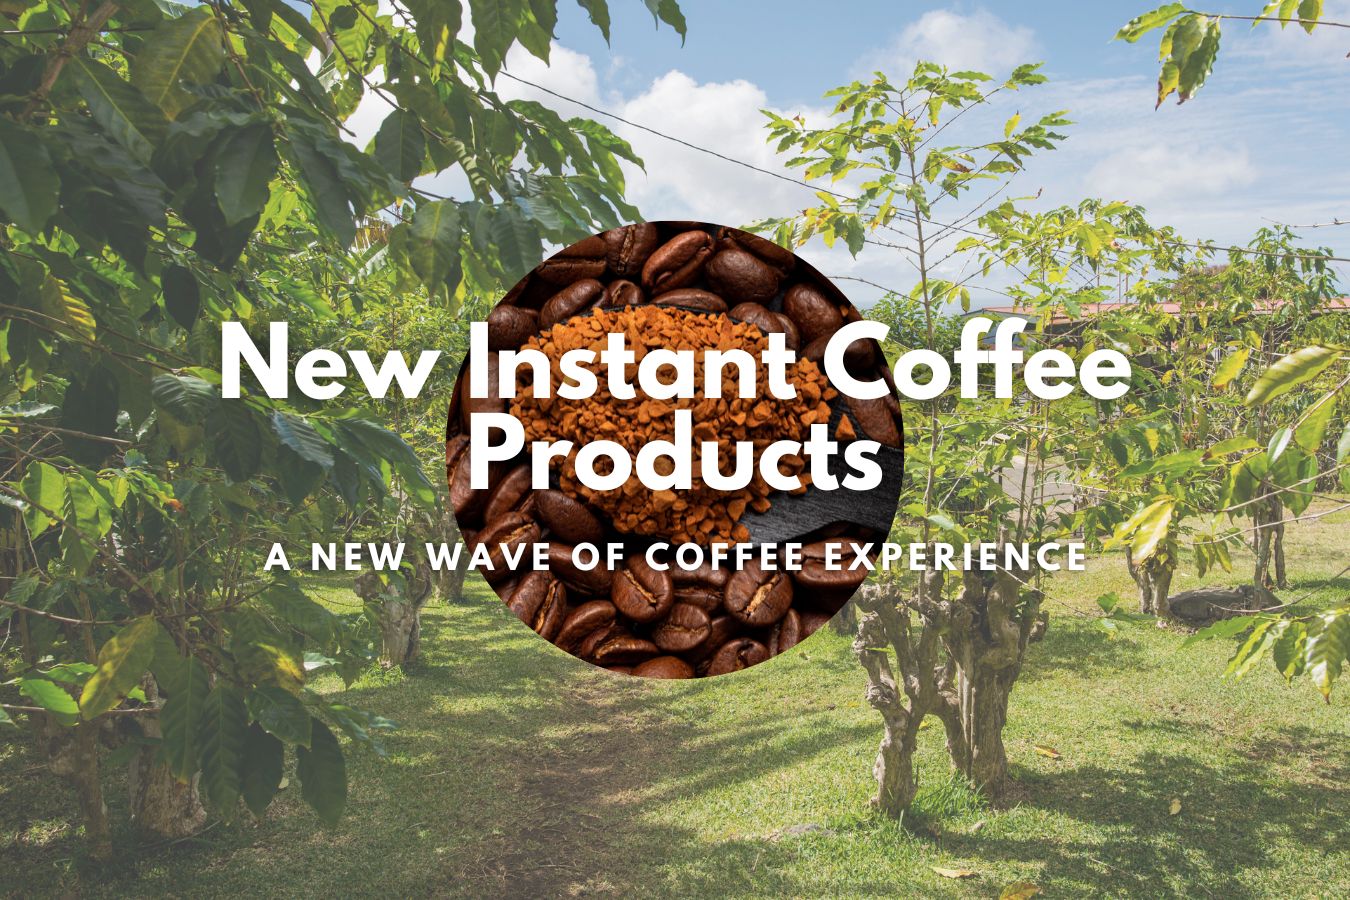 New Instant Coffee Products: A New Wave of Coffee Experience